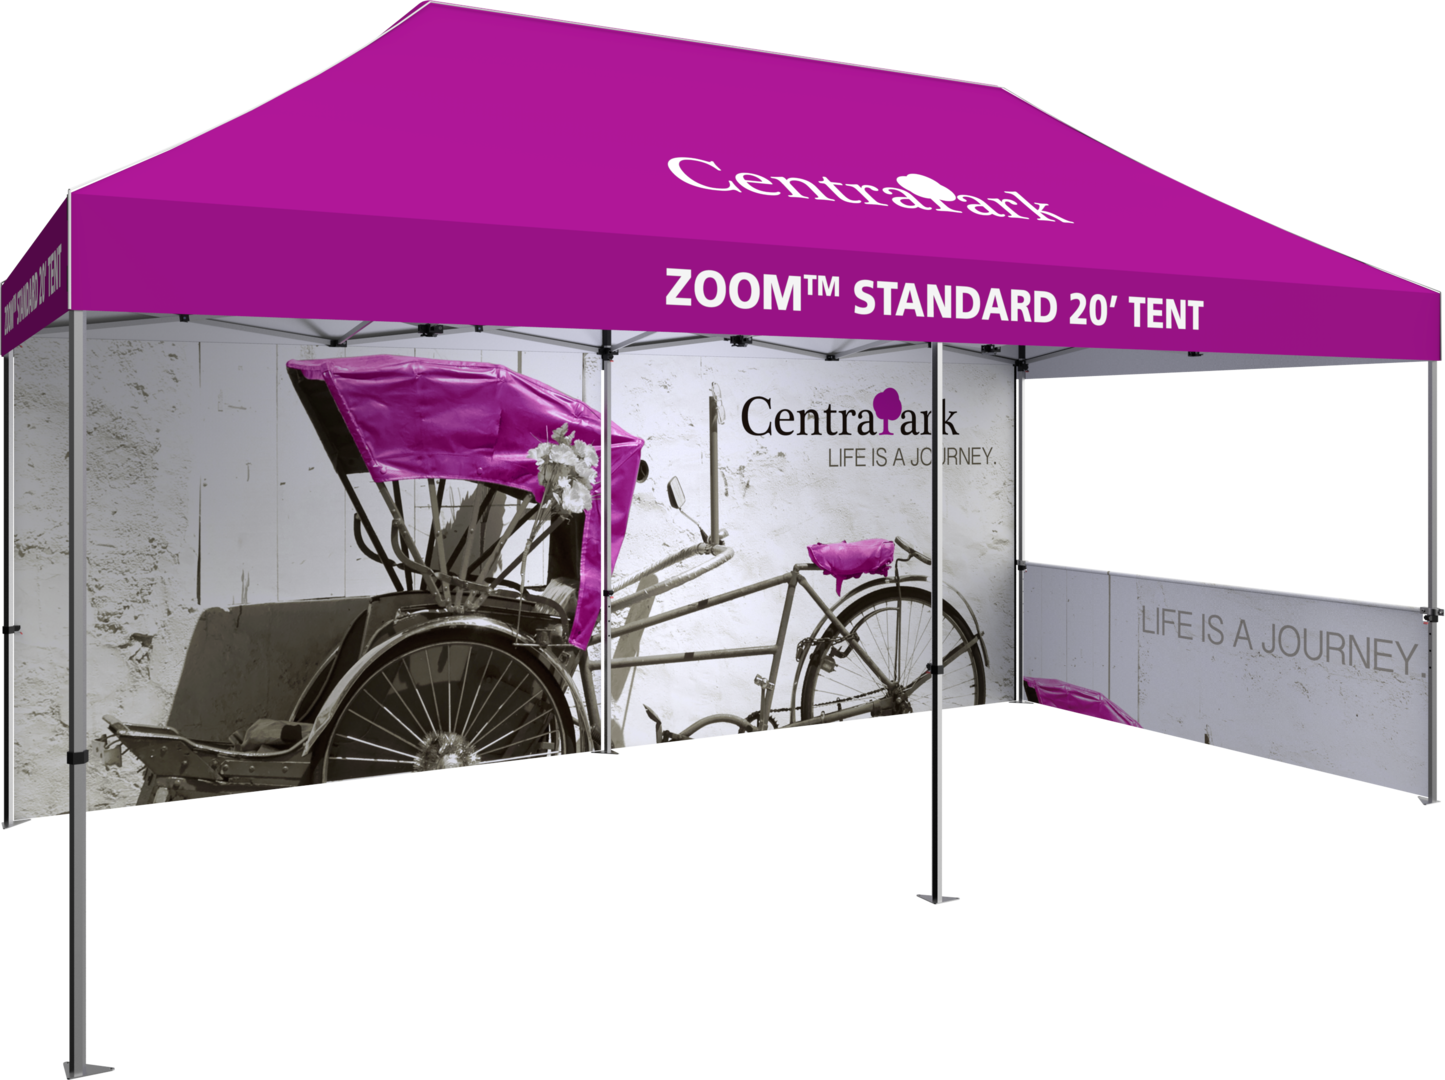 20ft x 10ft Zoom Standard Popup Tent Full Wall Custom Printed (Full Wall Graphic Only)